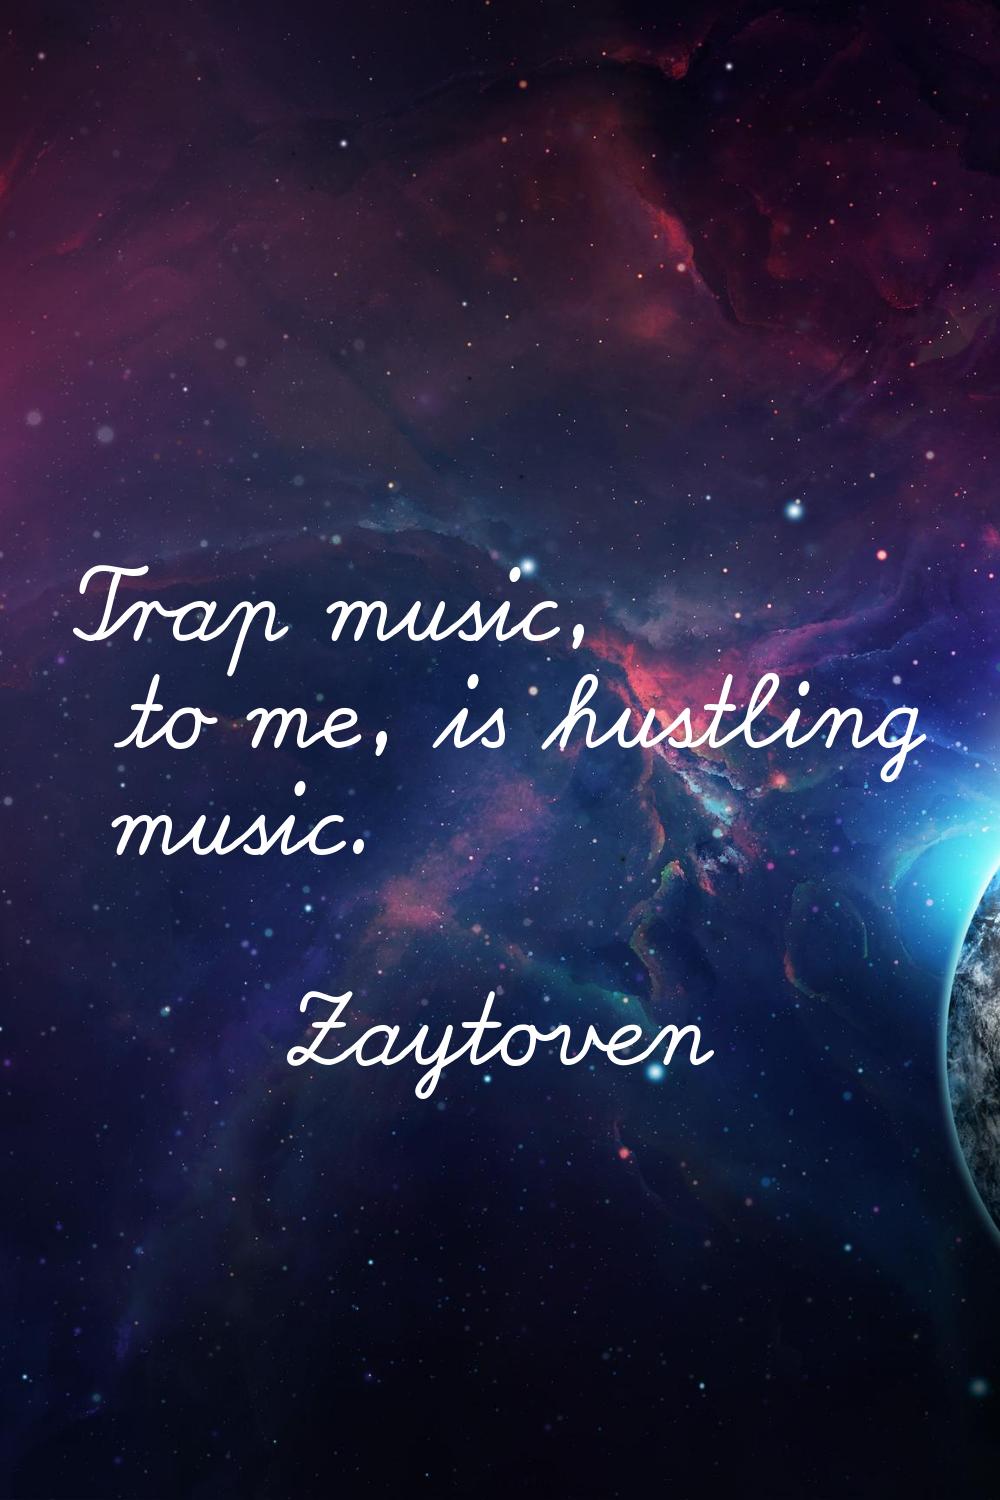 Trap music, to me, is hustling music.